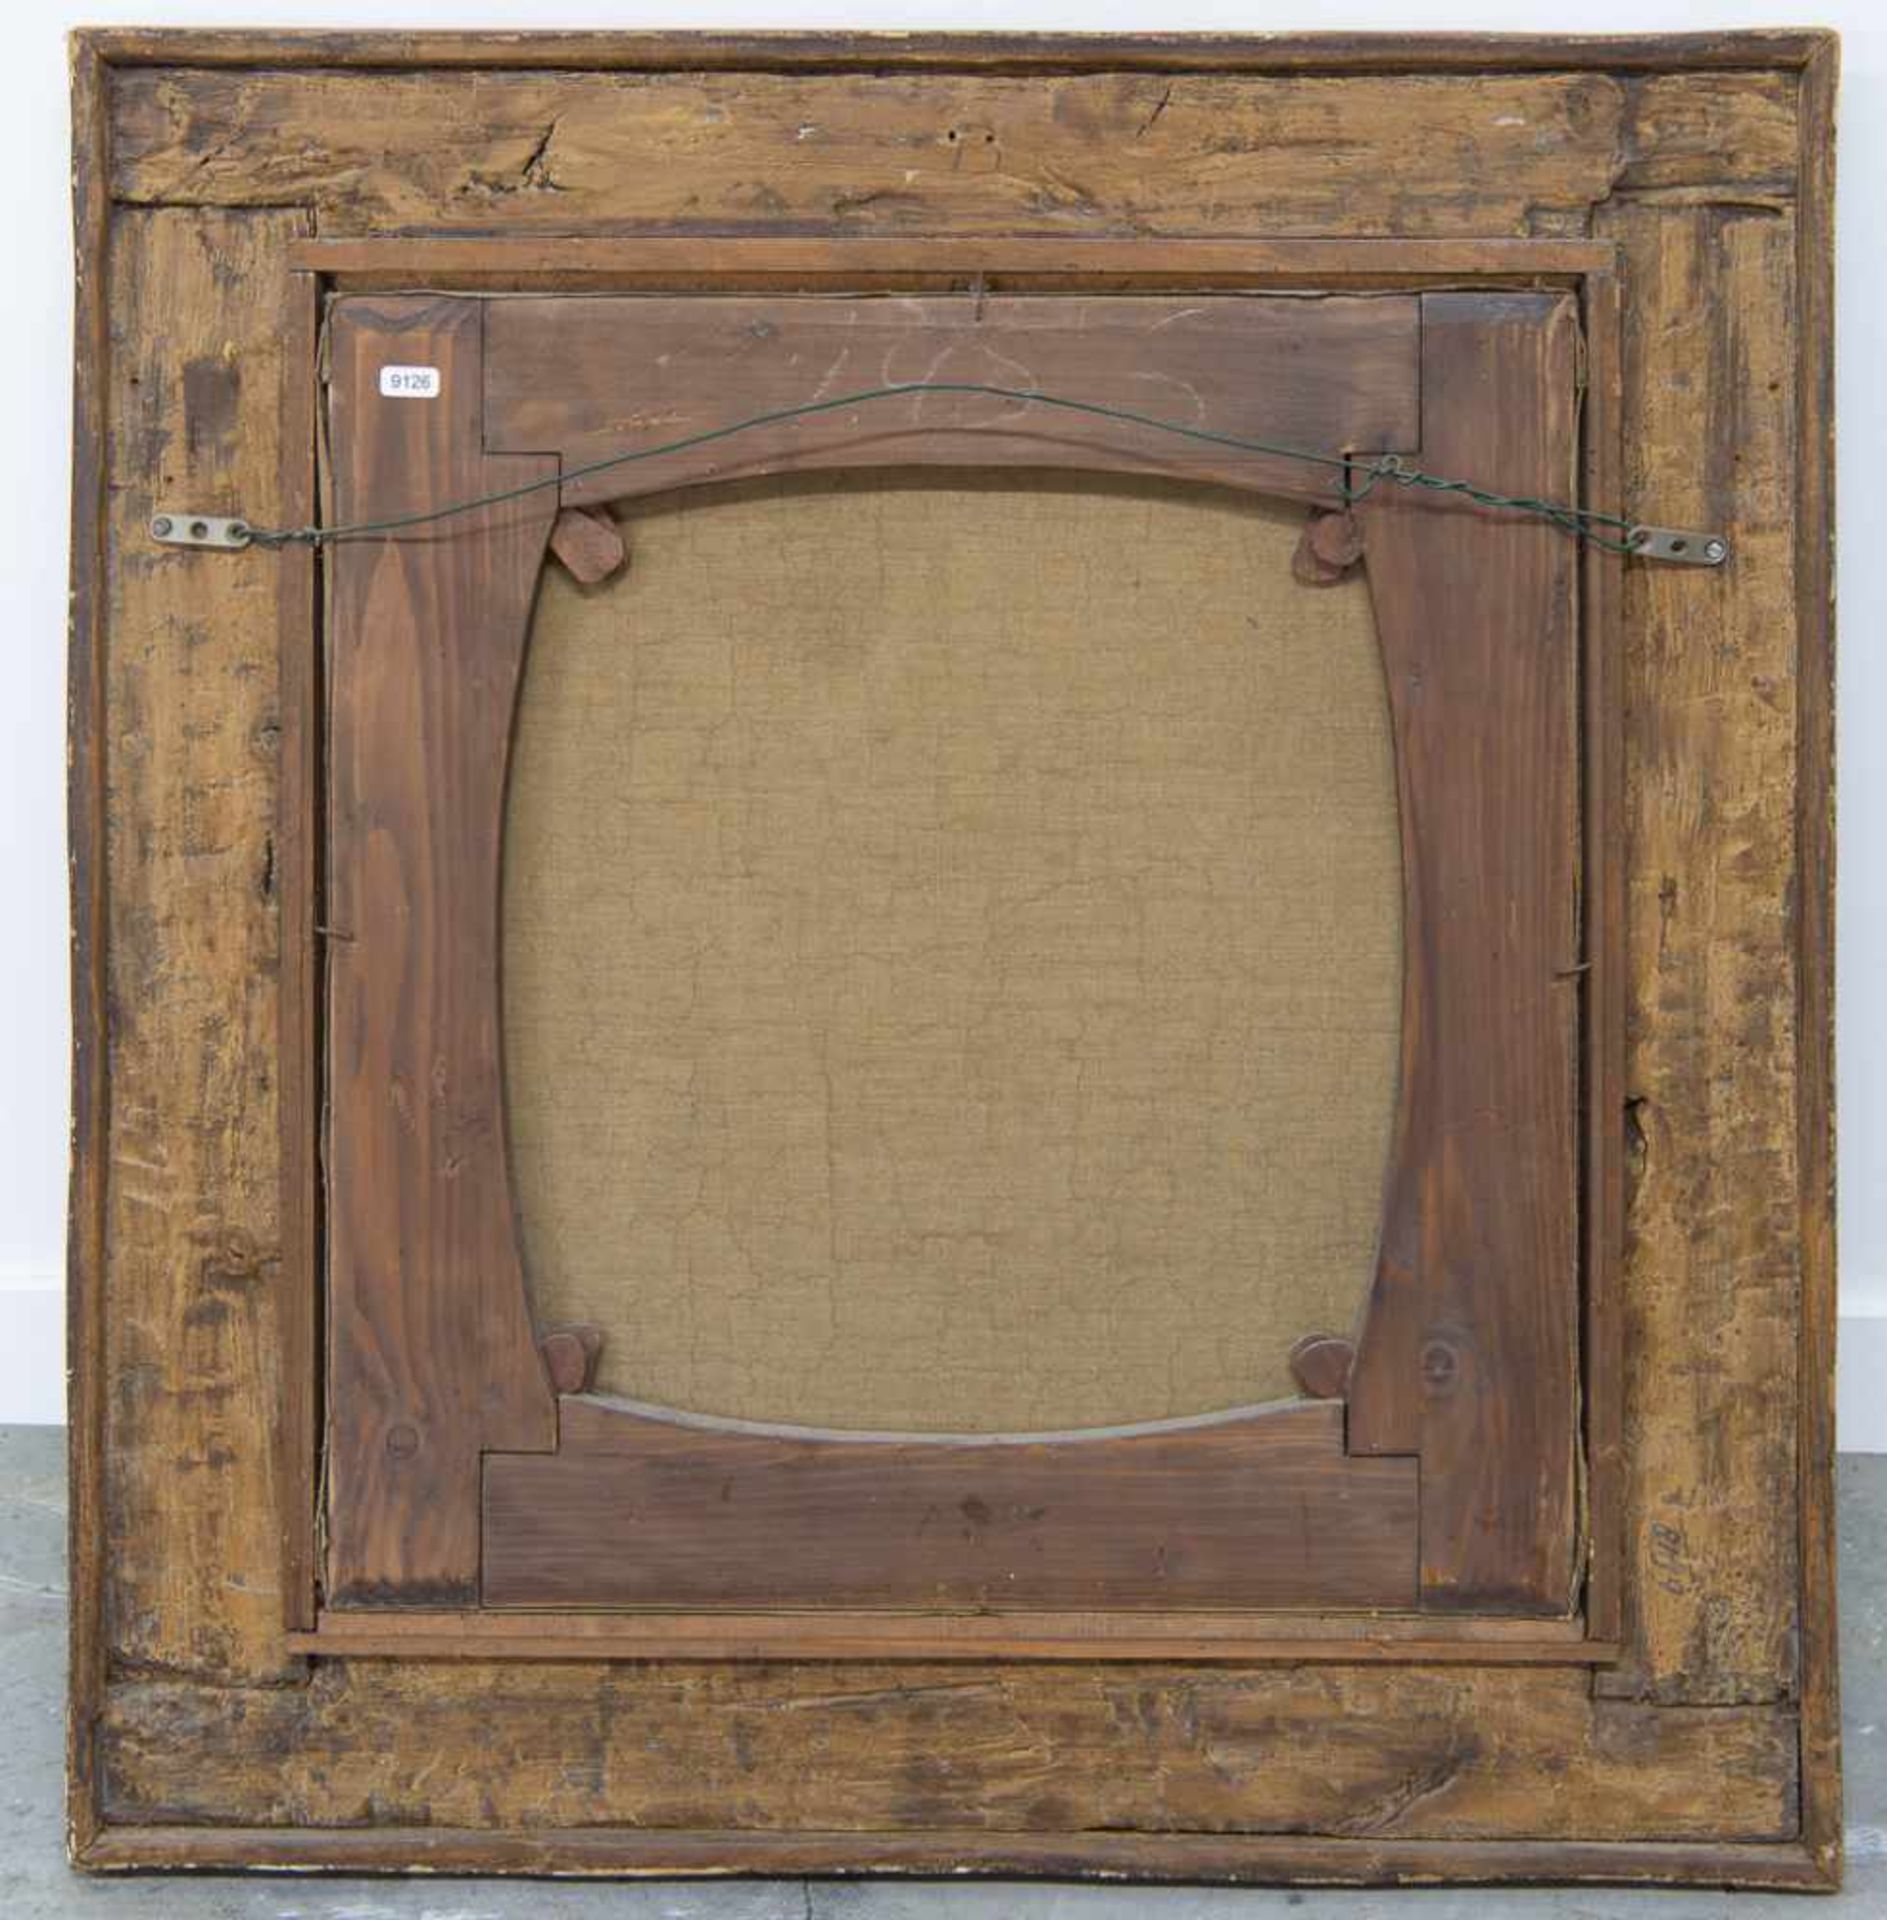 Painting in a sculptured wood frame - Image 8 of 9